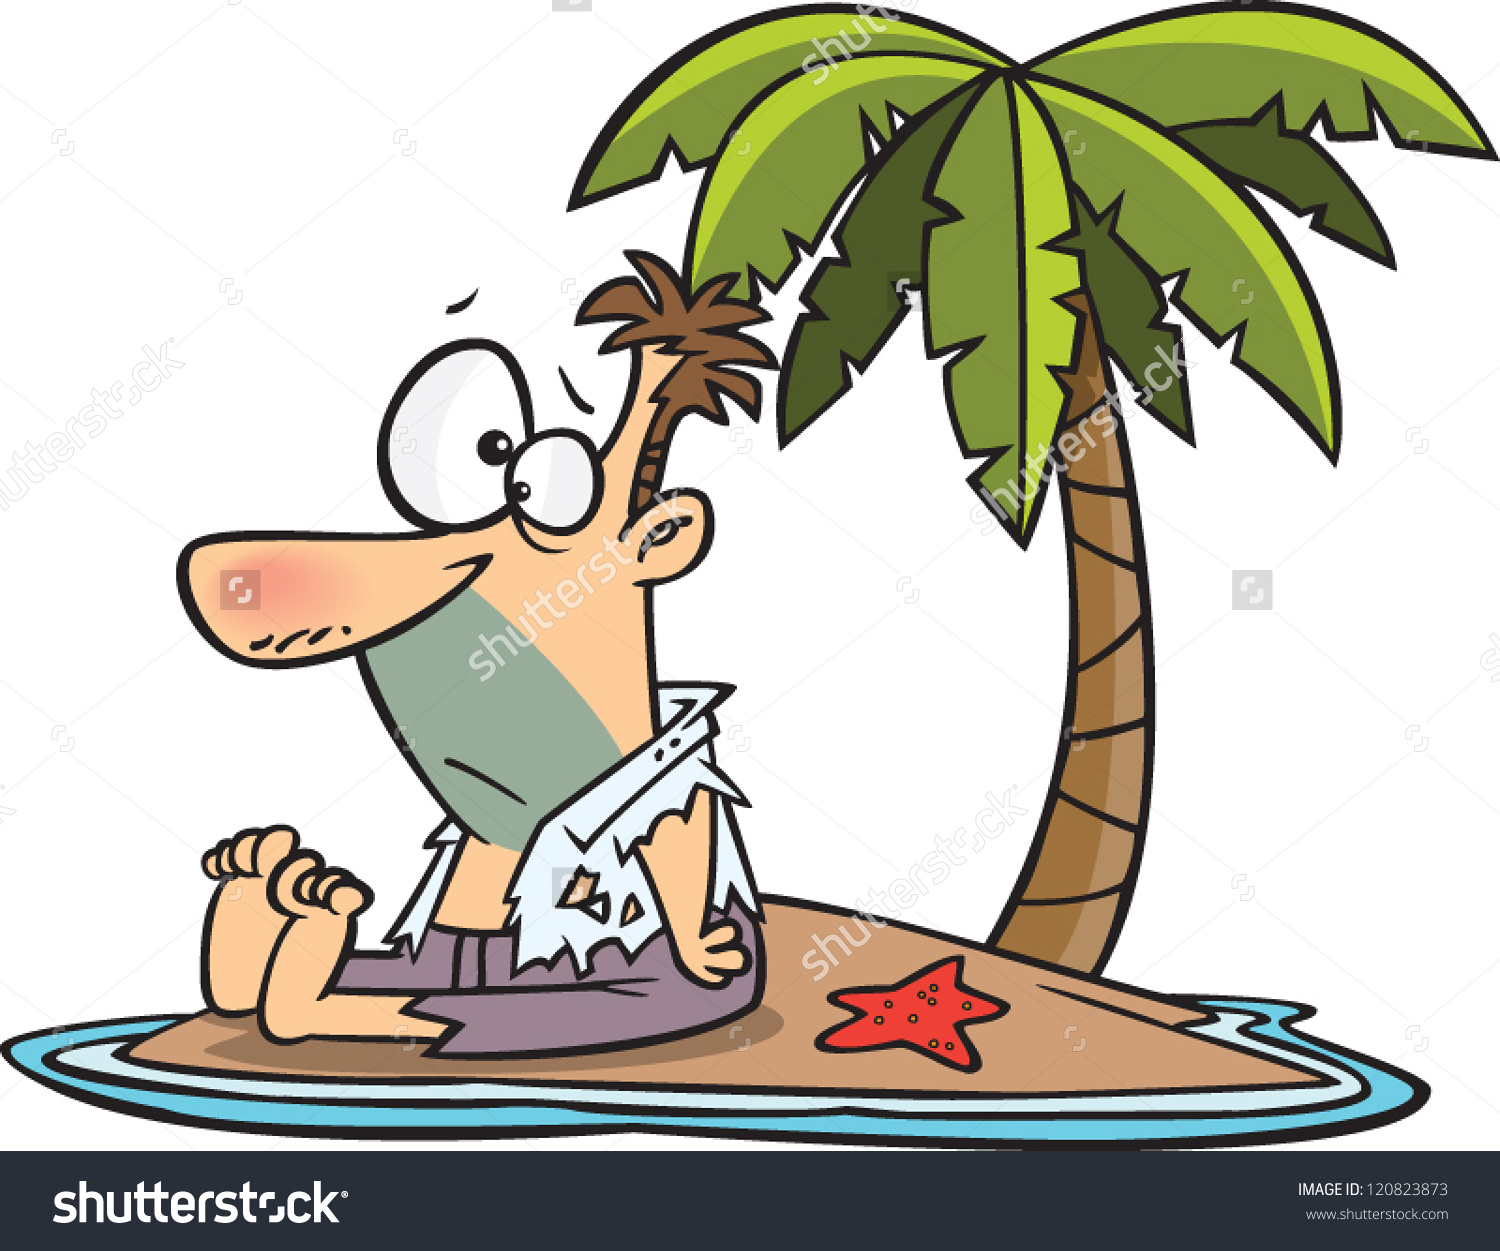 stock-vector-cartoon-man-stranded-on-a-deserted-island-with-a-palm-tree-120823873